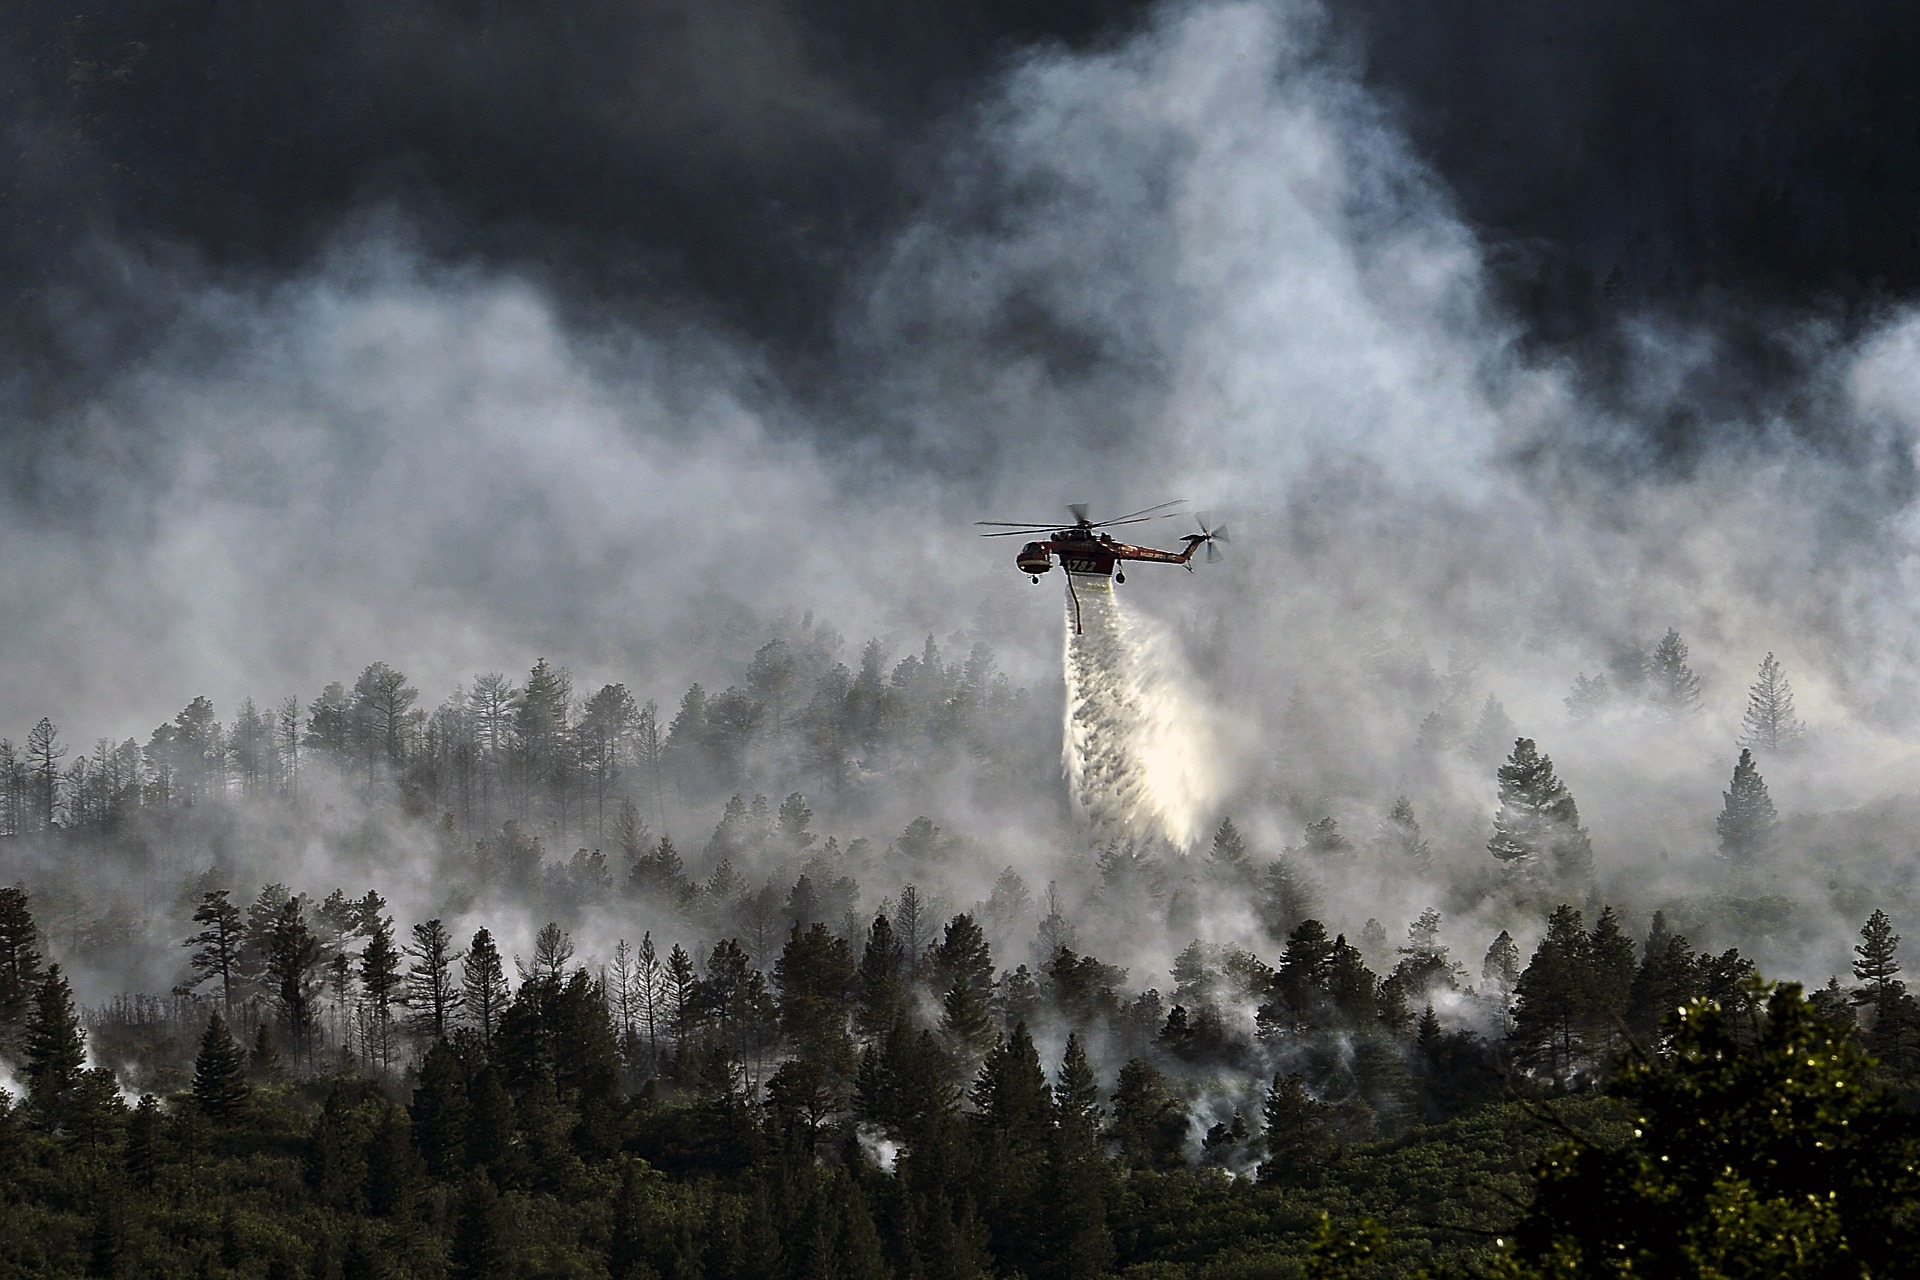 Wicked fire: Managing fire risk in a changing climate